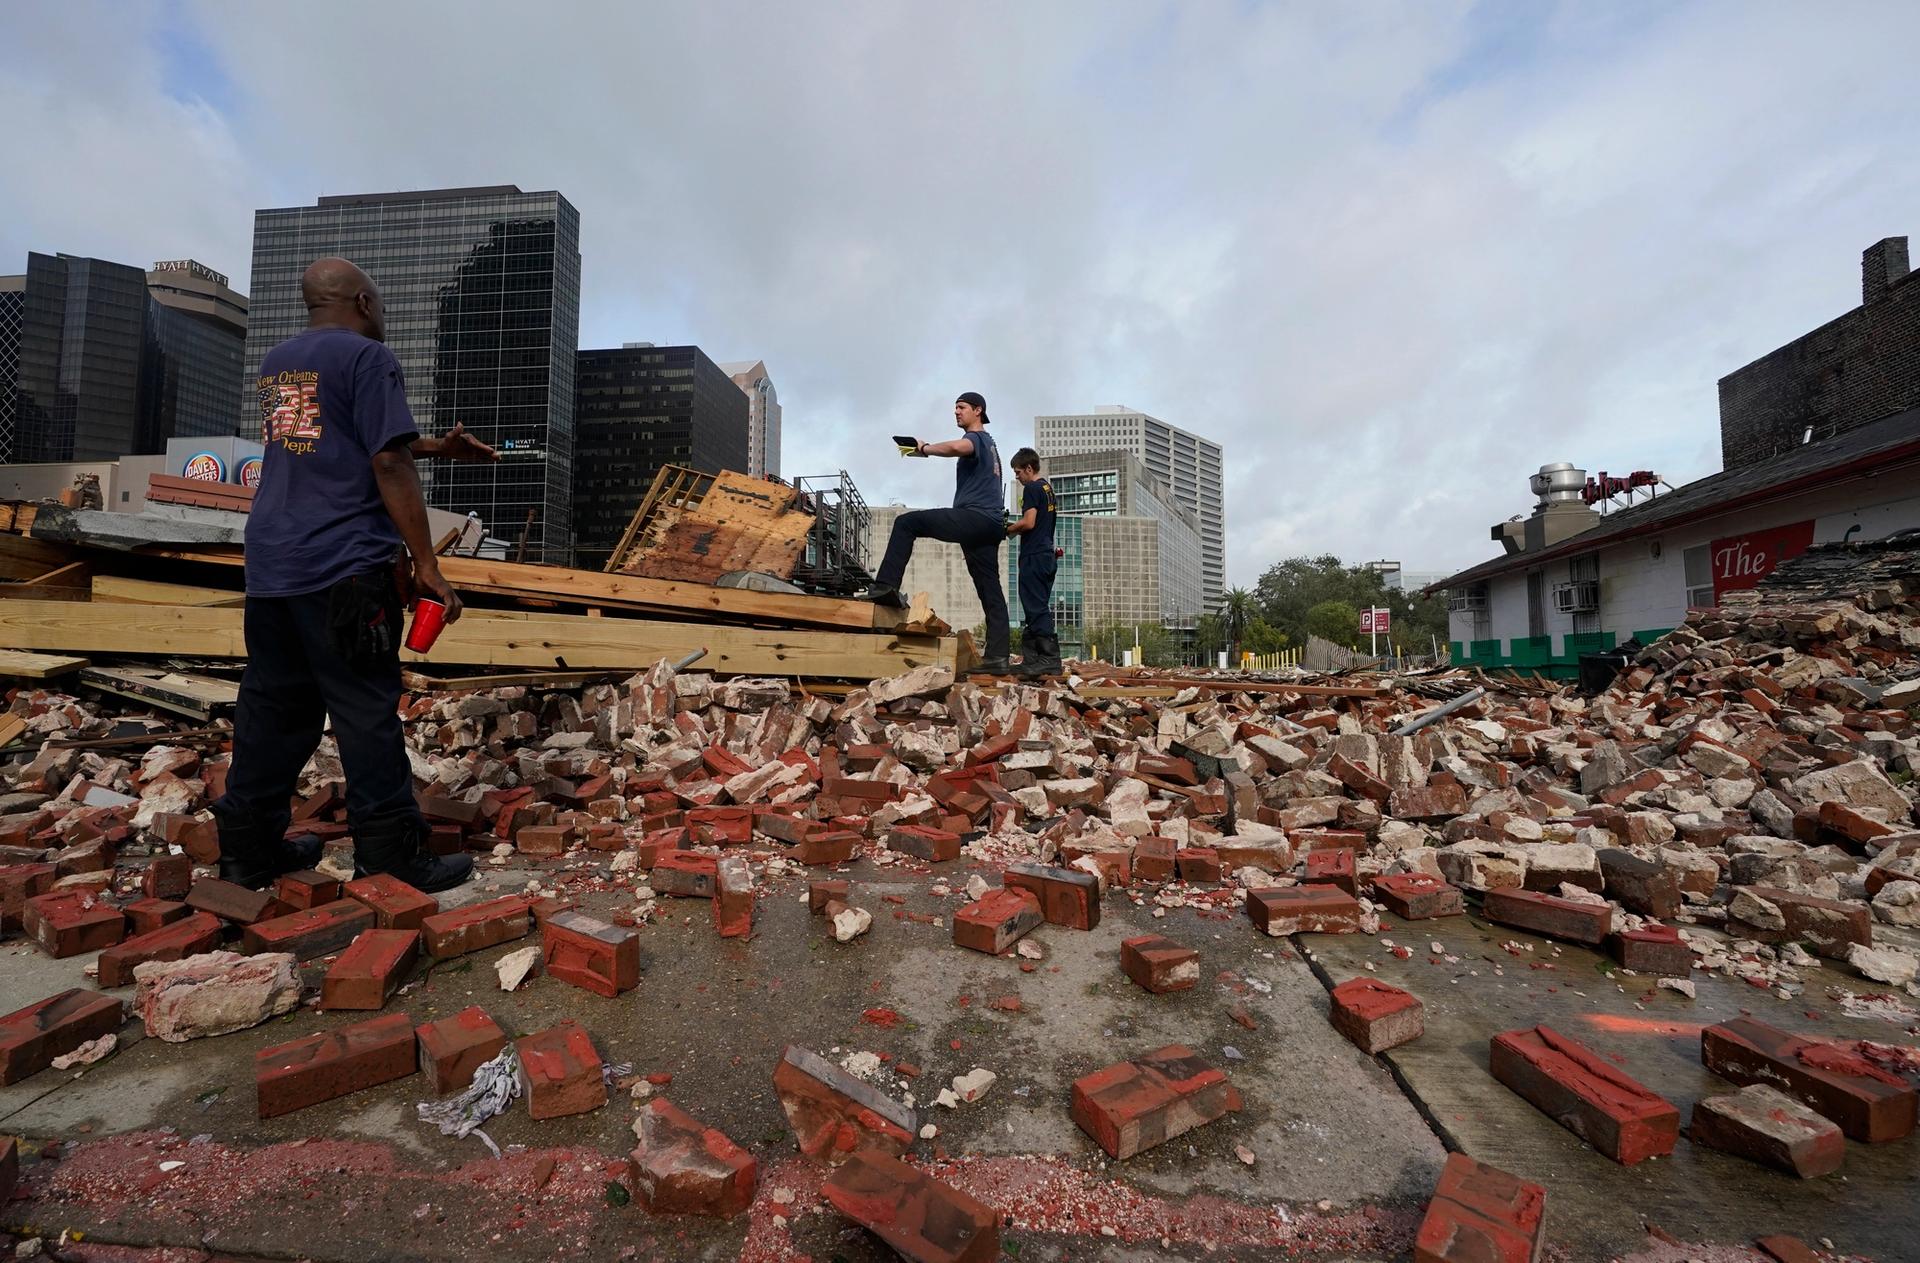 New Orleans firefighters assess damage as they look through debris after the Karnofsky Store building collapsed from the effects of Hurricane Ida AP Photo/Eric Gay